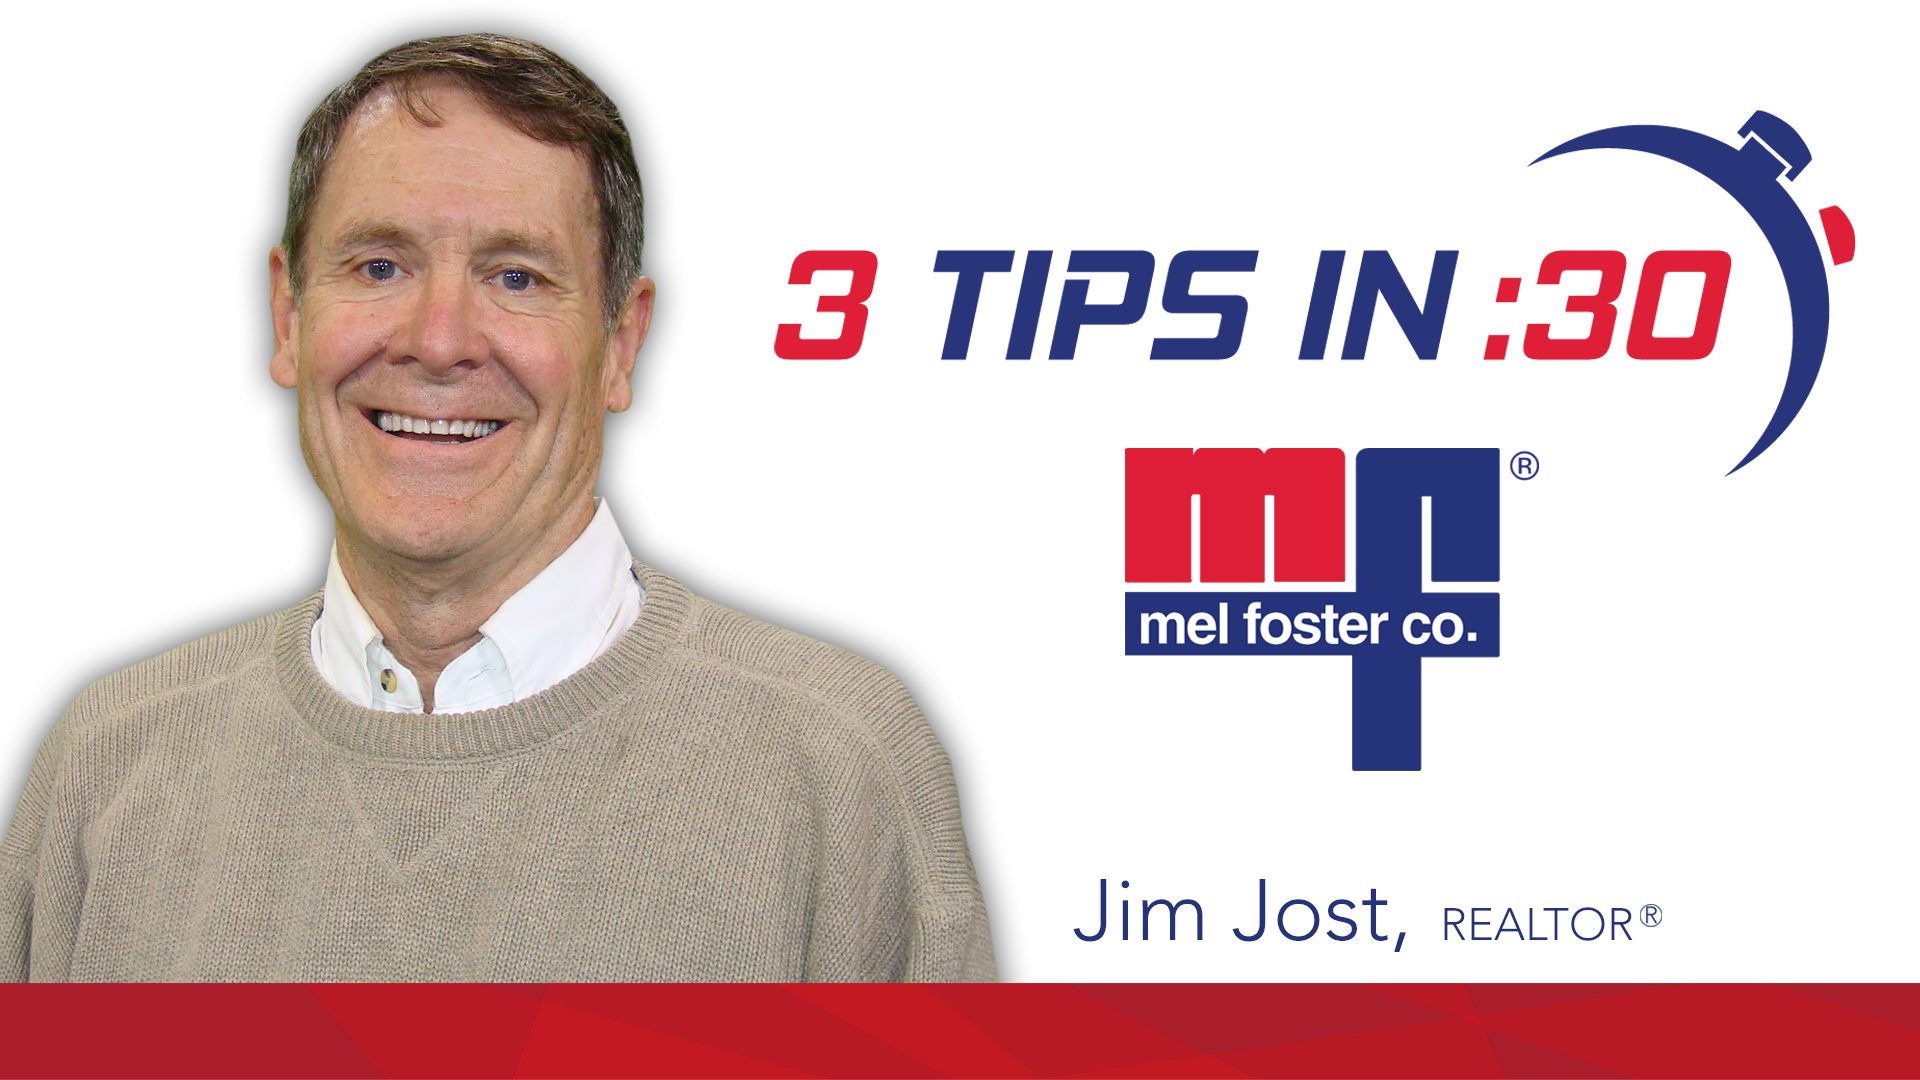 Jim Jost, REALTOR® with Mel Foster Co. gives Tips in 30